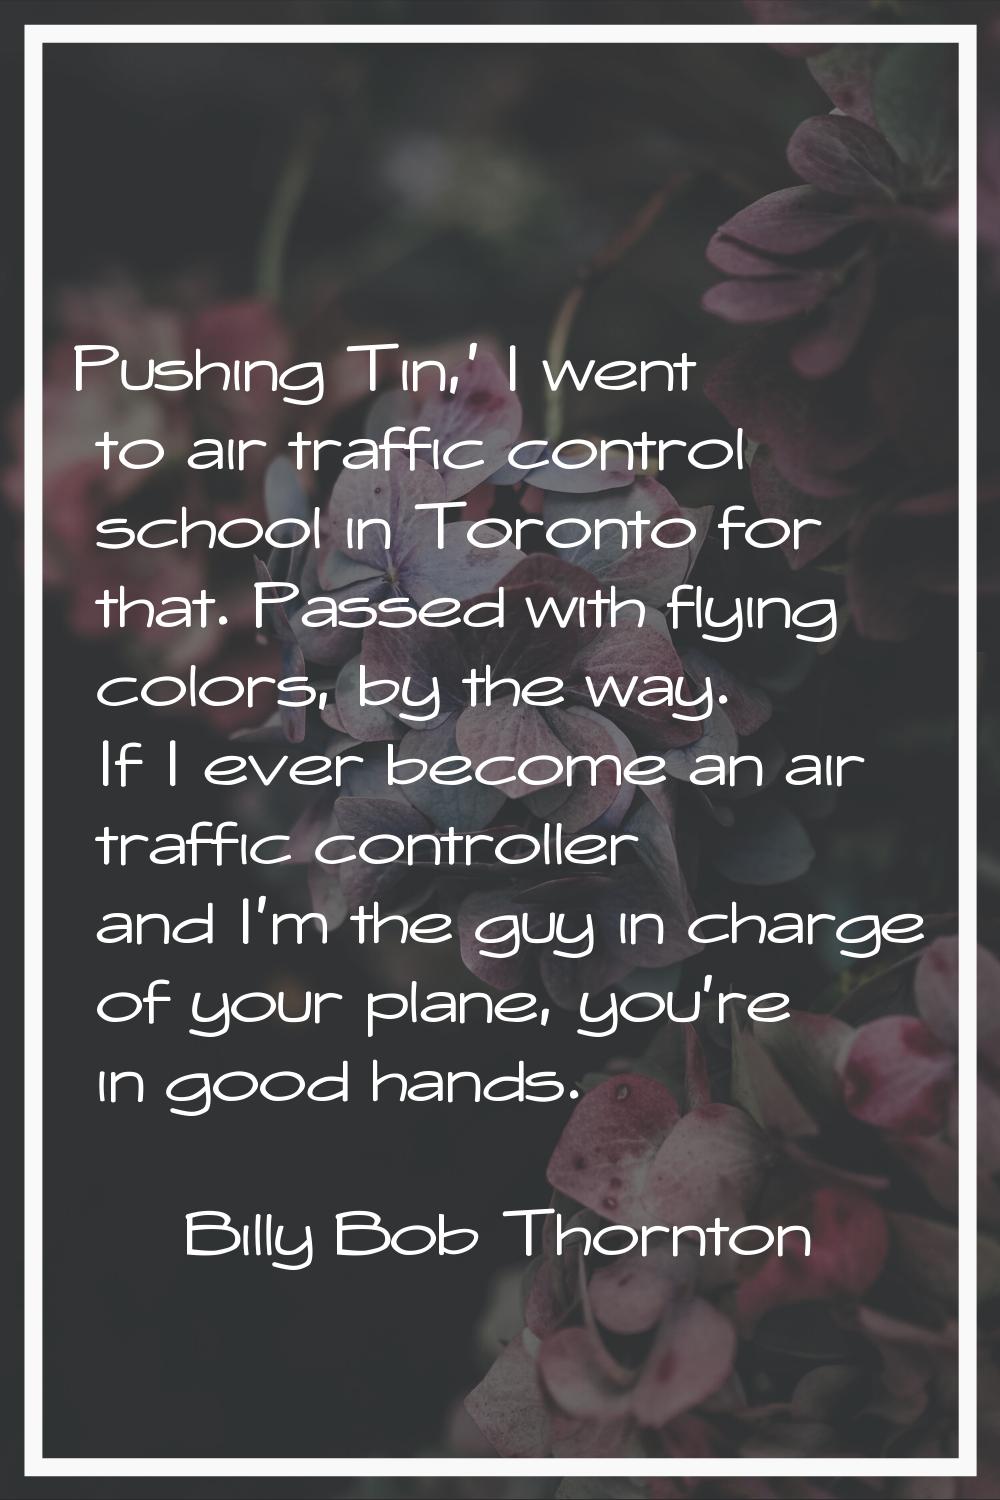 Pushing Tin,' I went to air traffic control school in Toronto for that. Passed with flying colors, 